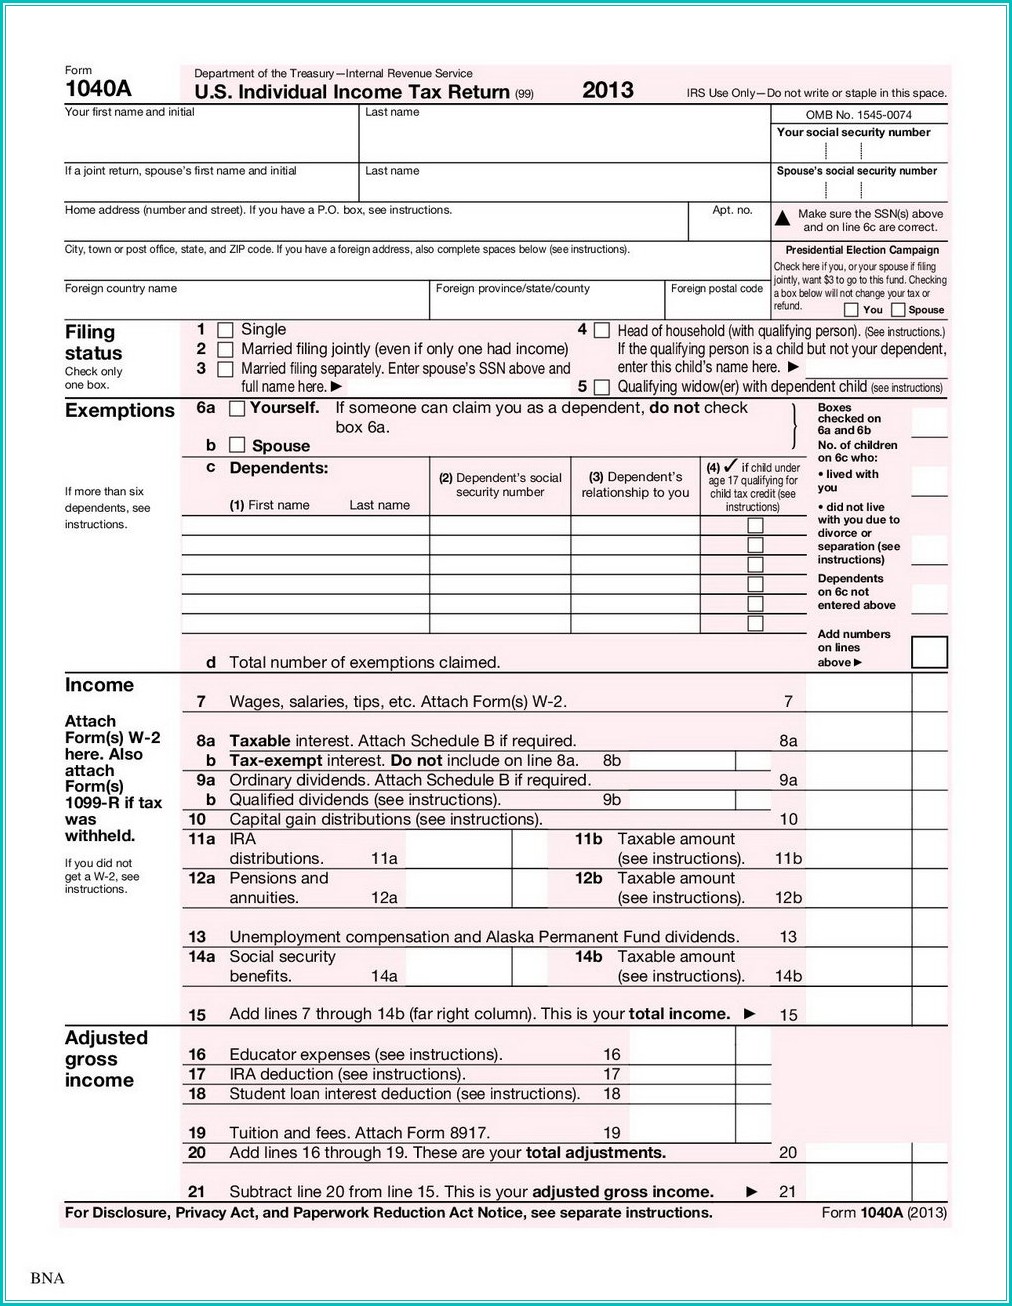 Tax Forms 1040a